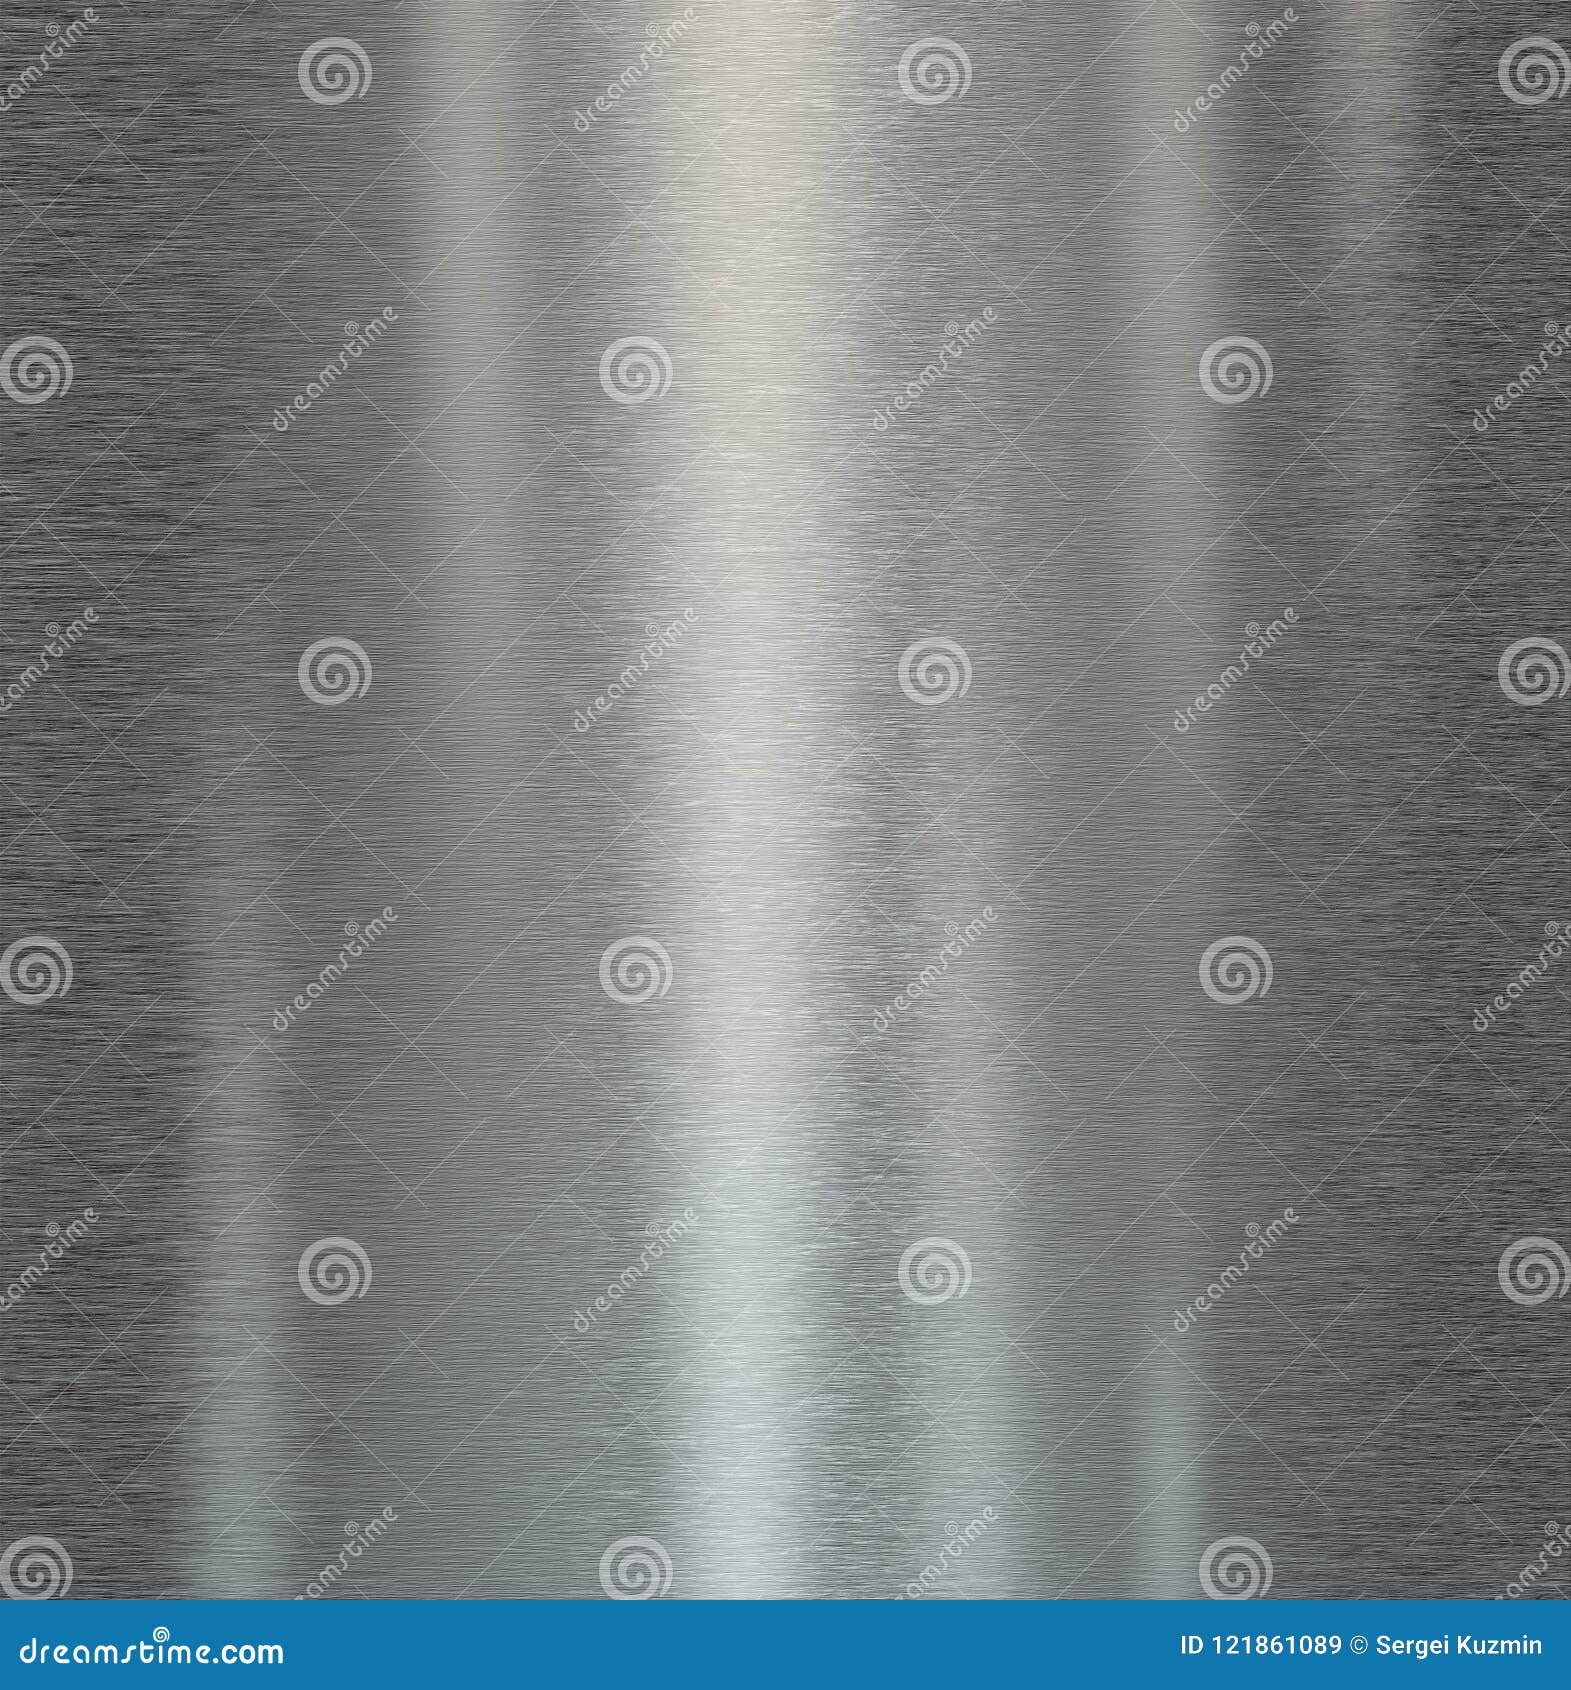 shiny scrathced metal texture background